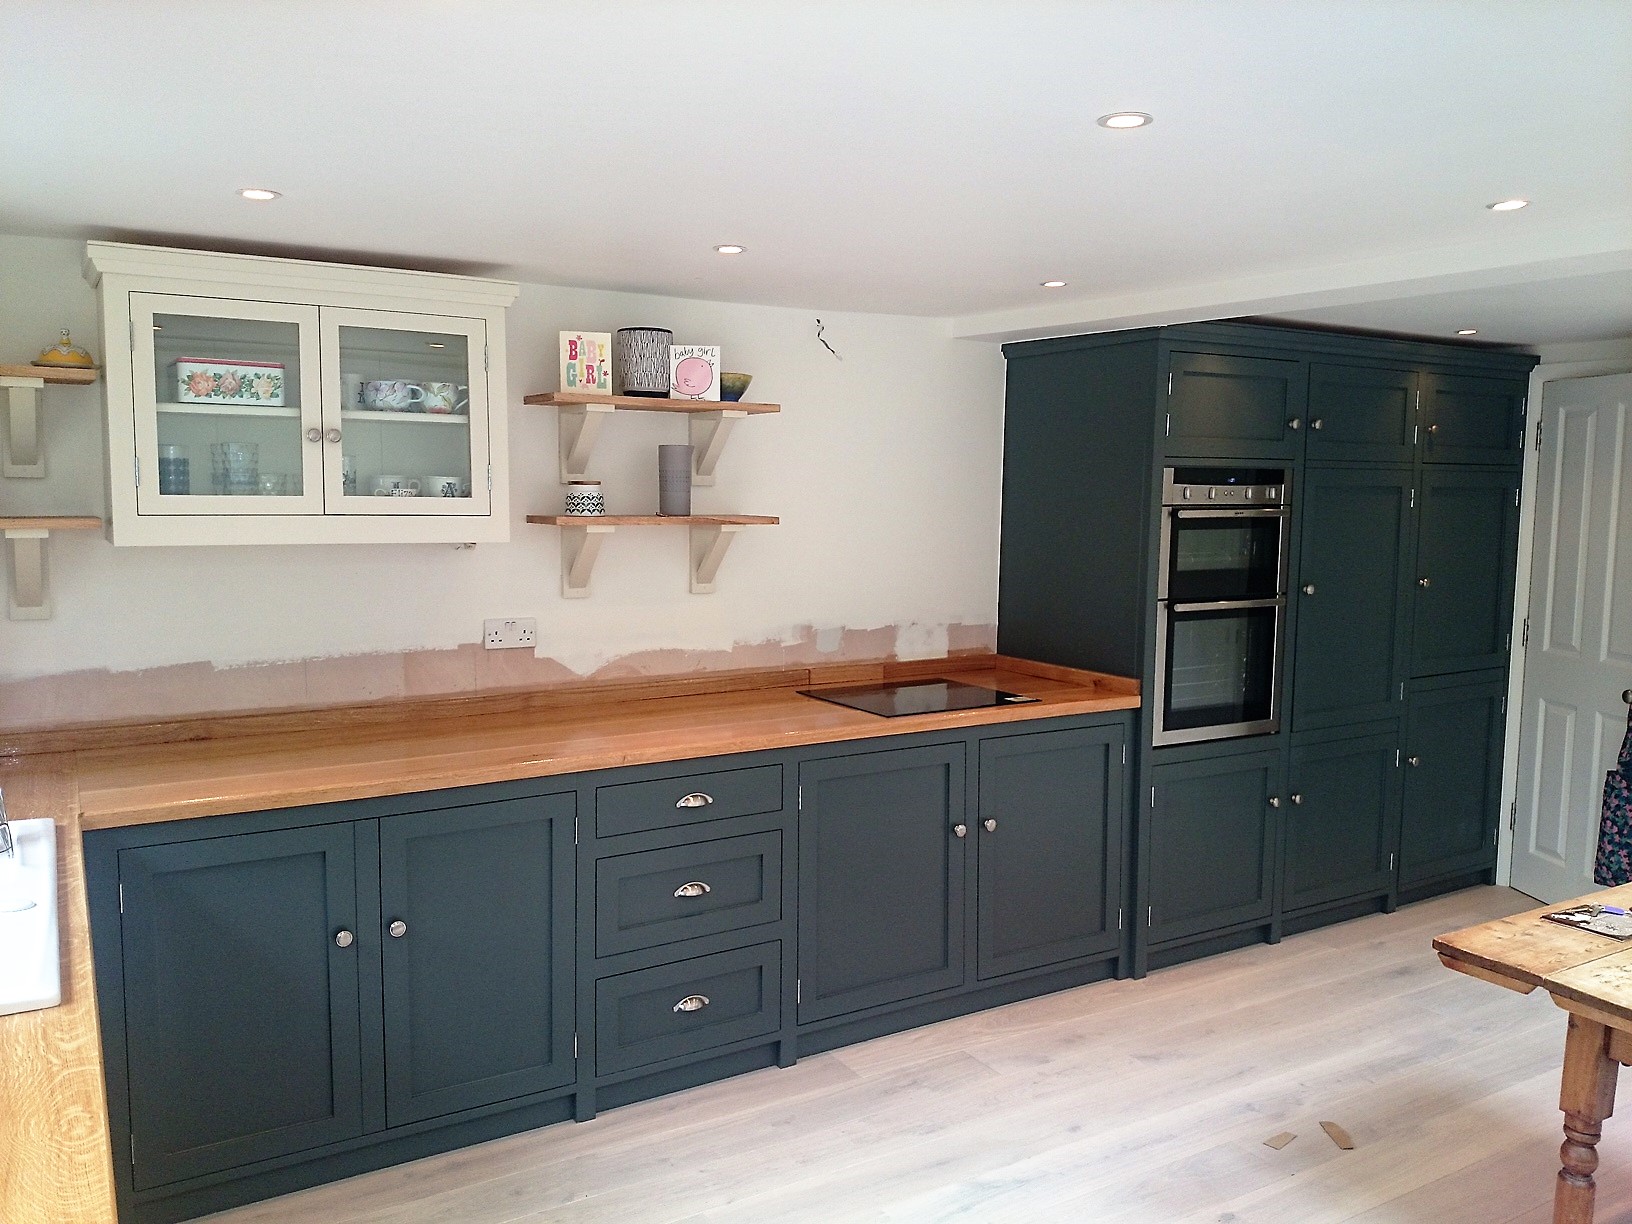 Fulle bespoke,shaker style fitted kitchen hand built from solid wood with wide plank solid oak surface tops.